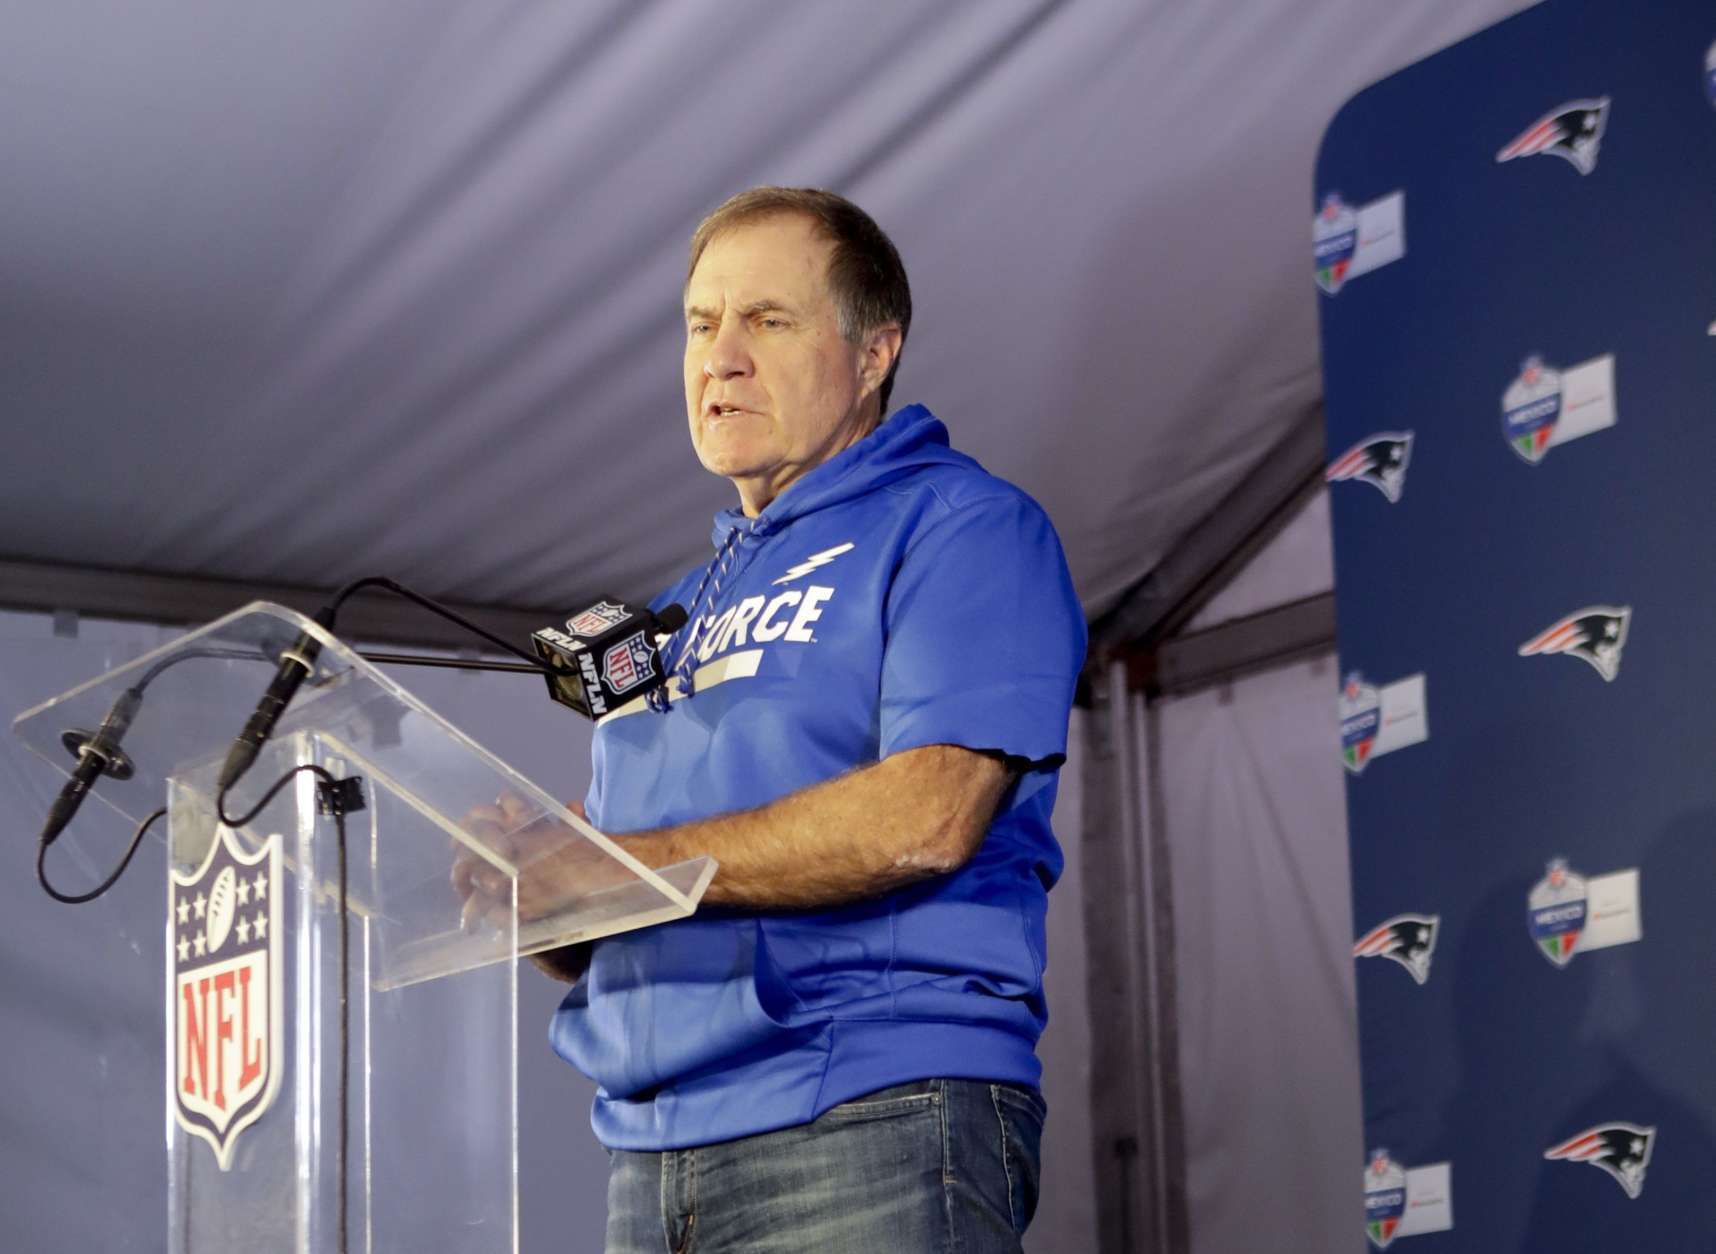 New England Patriots head coach Bill Belichick wears an Air Force sweatshirt as he speaks during a news conference after an NFL football game against the Oakland Raiders Sunday, Nov. 19, 2017, in Mexico City. (AP Photo/Rebecca Blackwell)